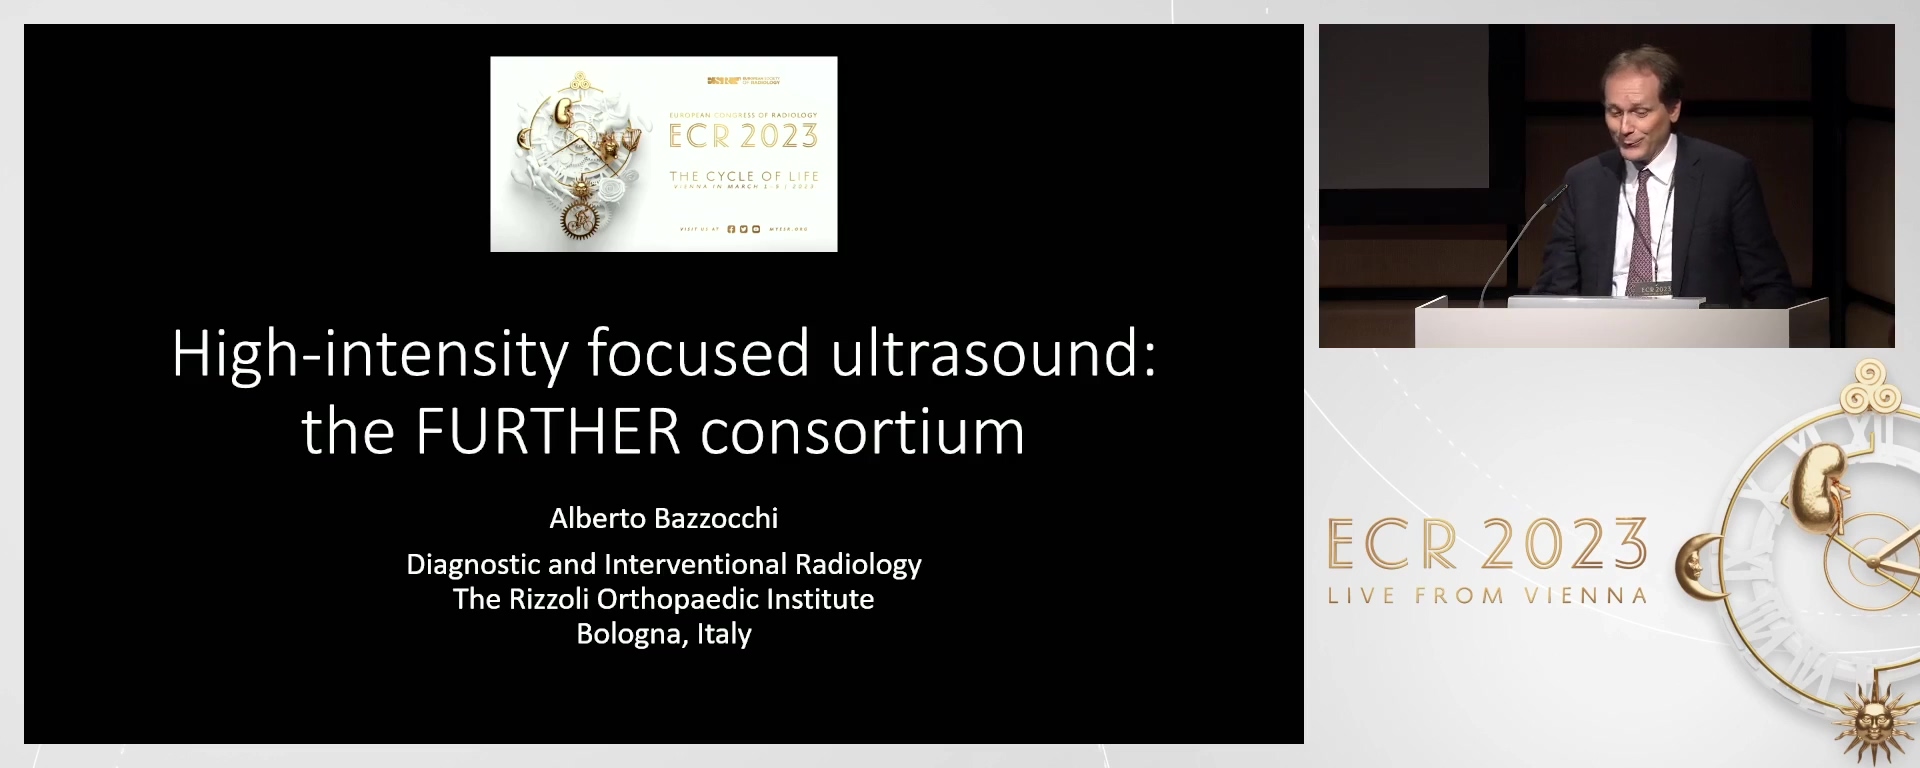 High-intensity focused ultrasound: the FURTHER consortium